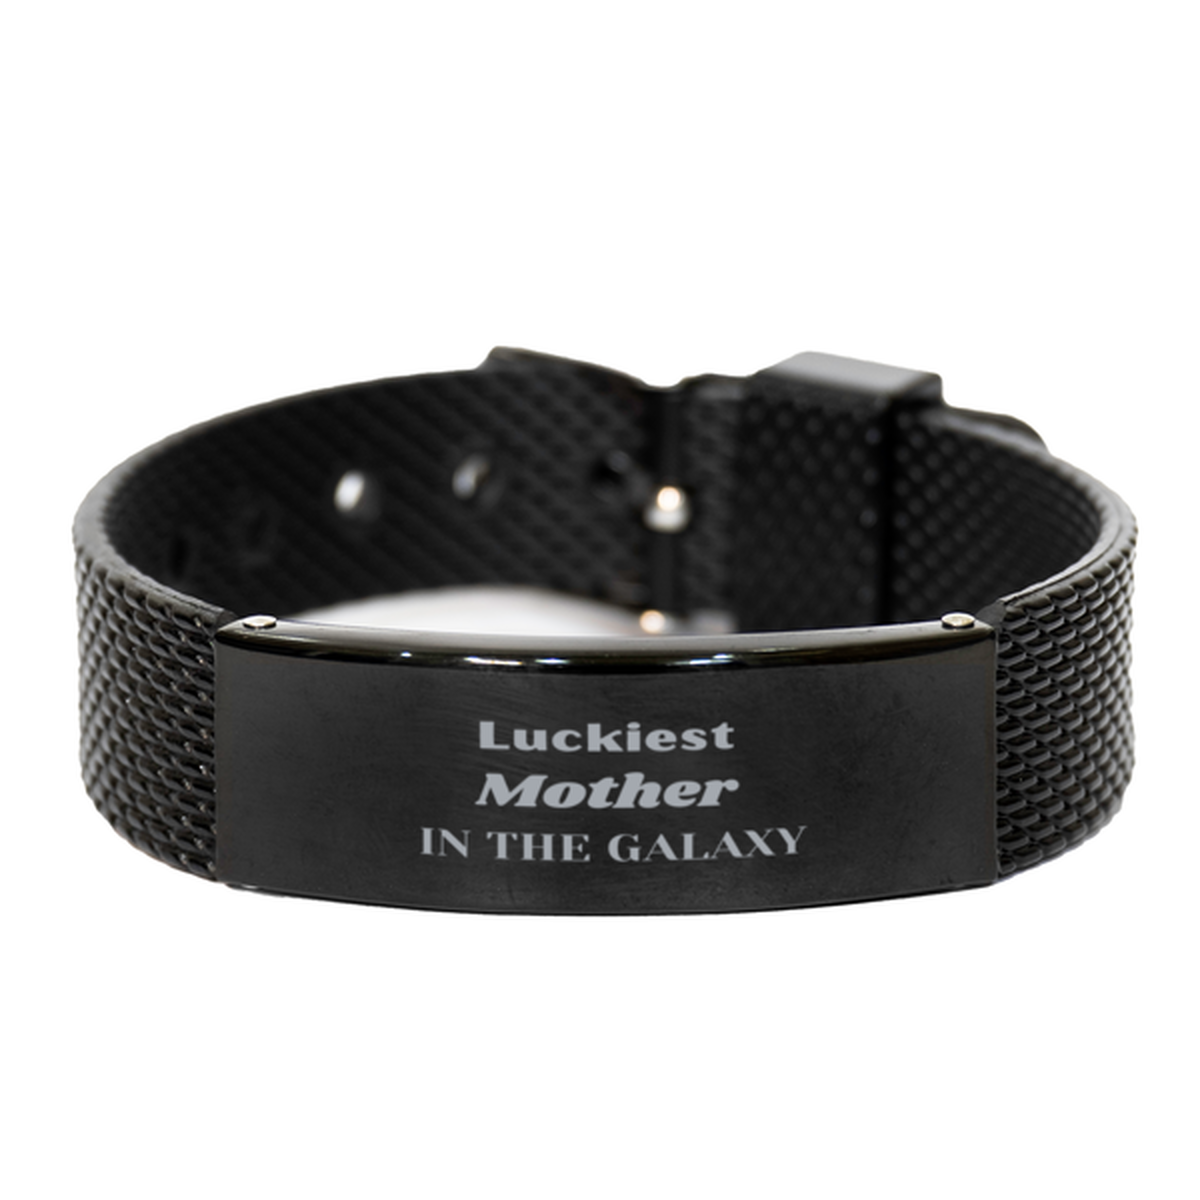 Luckiest Mother in the Galaxy, To My Mother Engraved Gifts, Christmas Mother Black Shark Mesh Bracelet Gifts, X-mas Birthday Unique Gifts For Mother Men Women